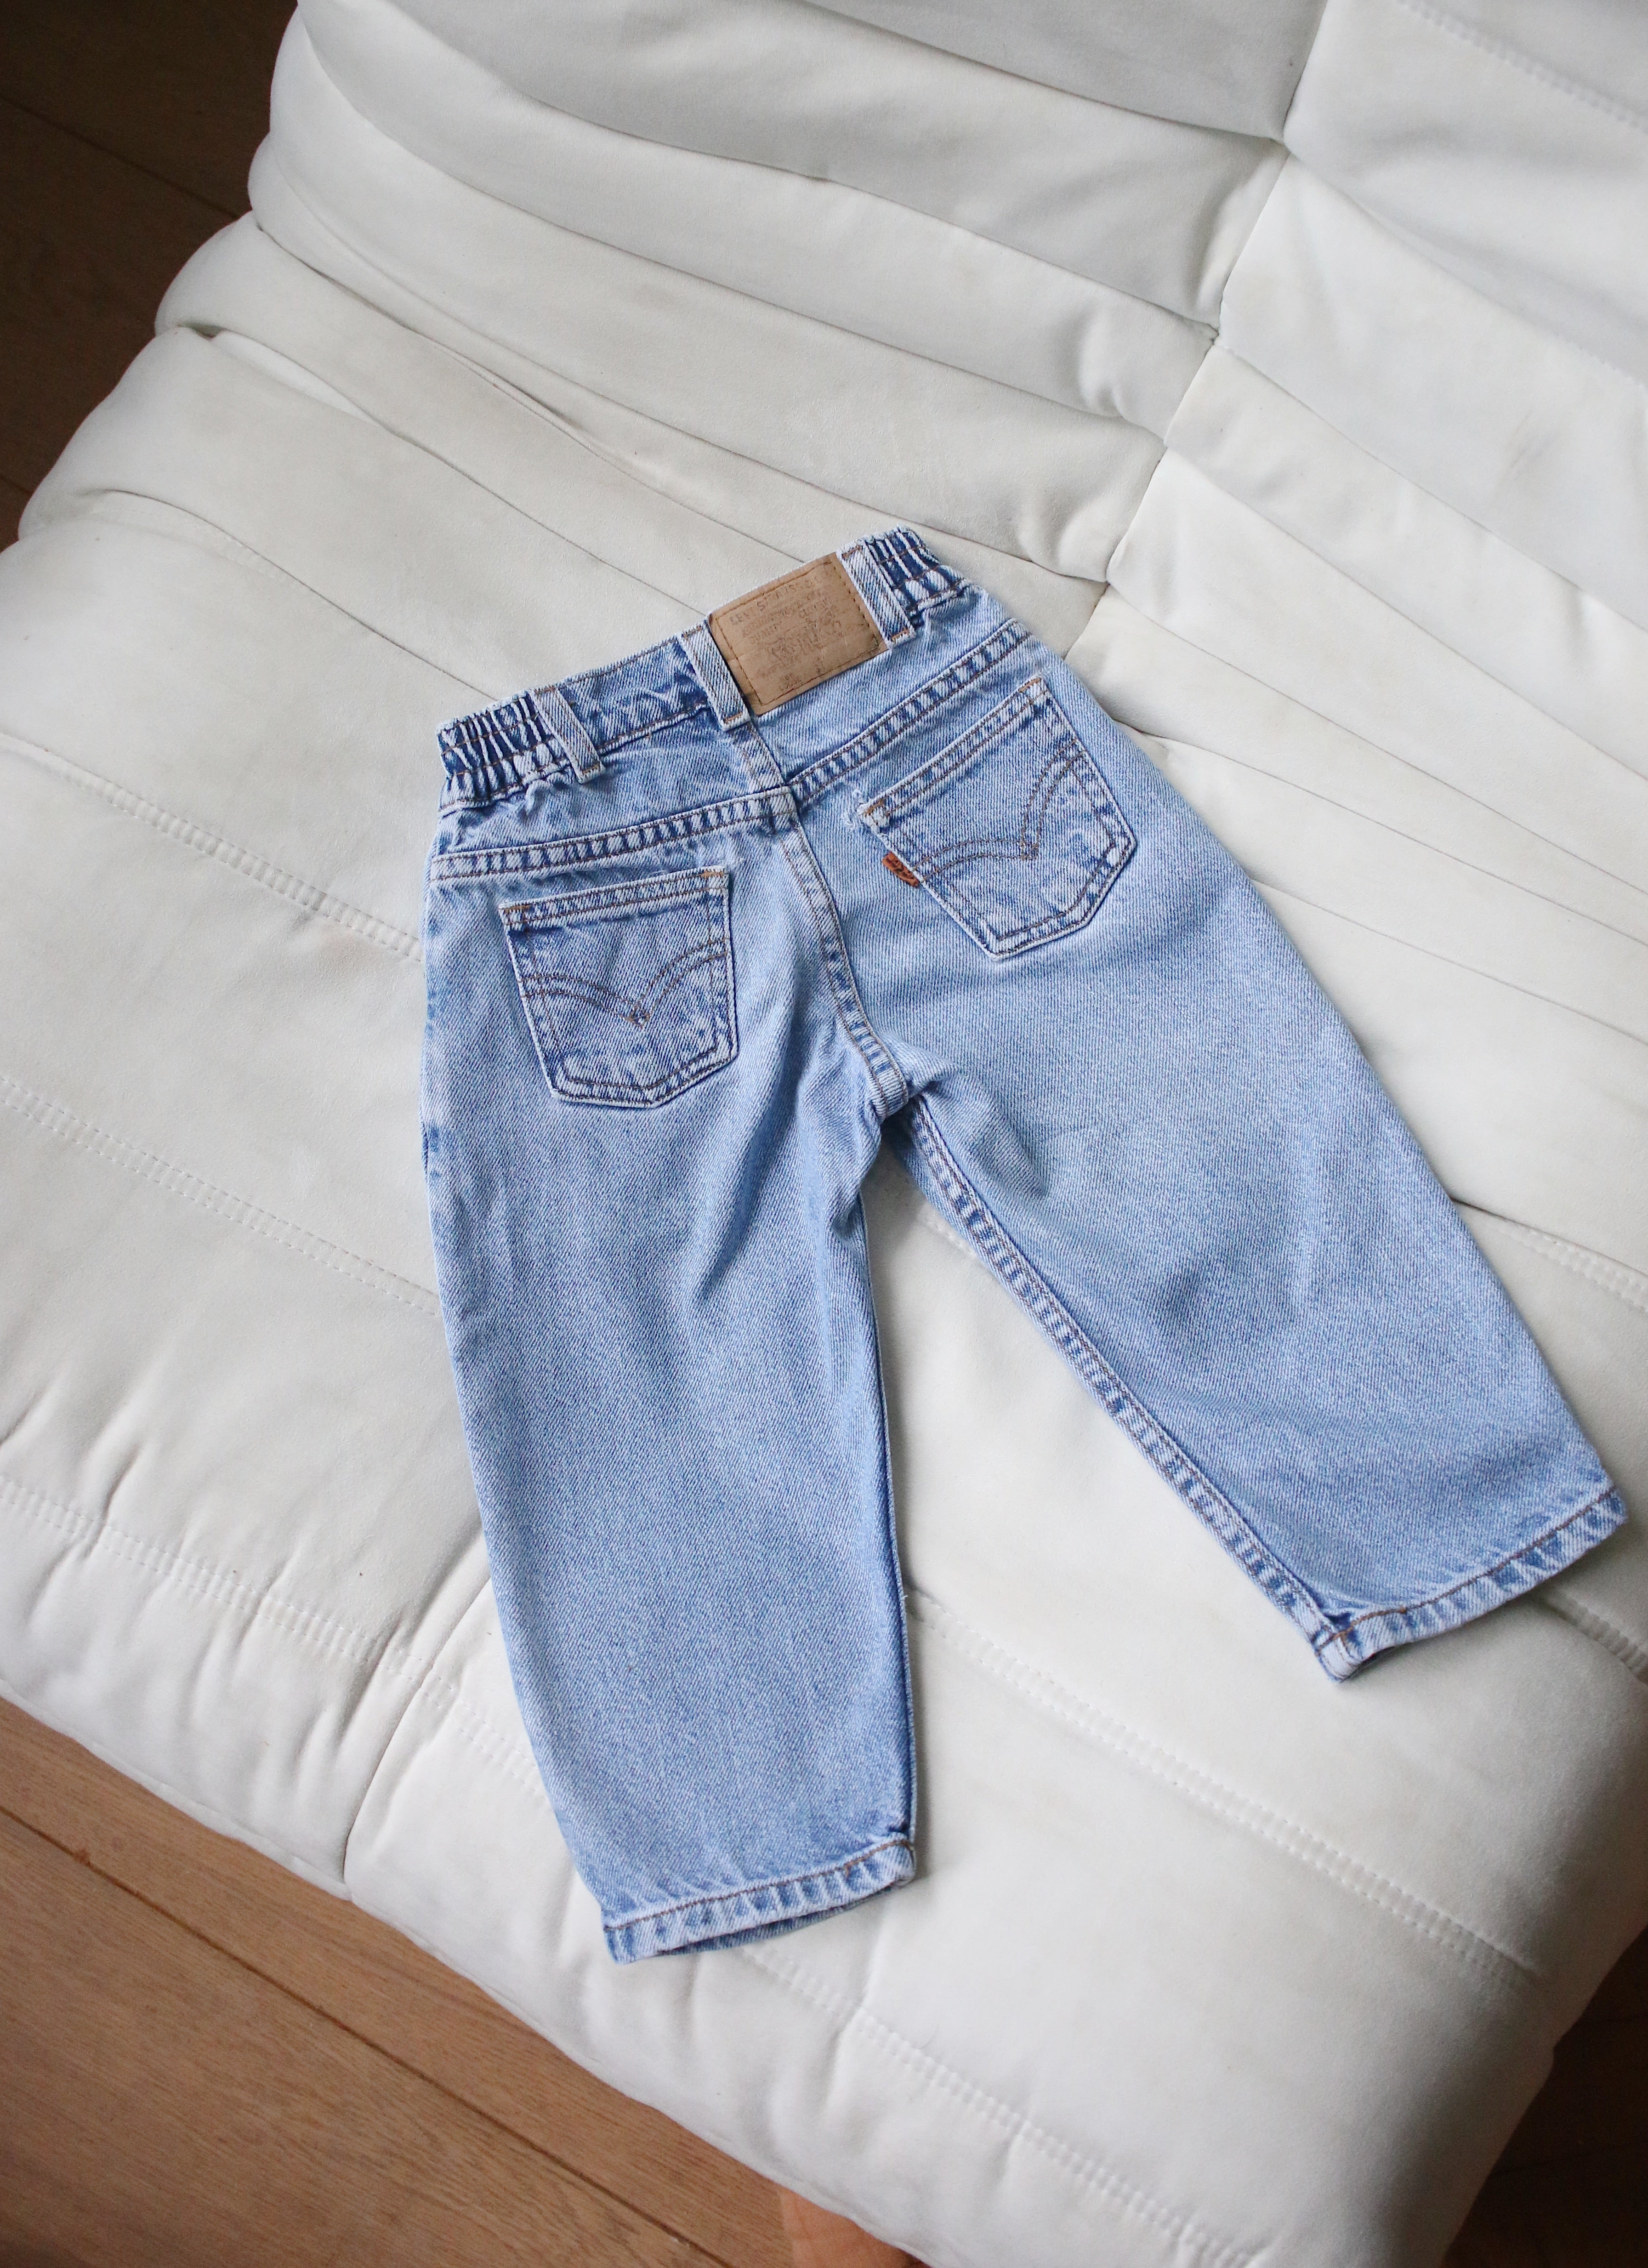 FOR AUCTION WINNER - Vintage Levi's orange tab 566 jeans - size 2-3 years - Made in Guatamala